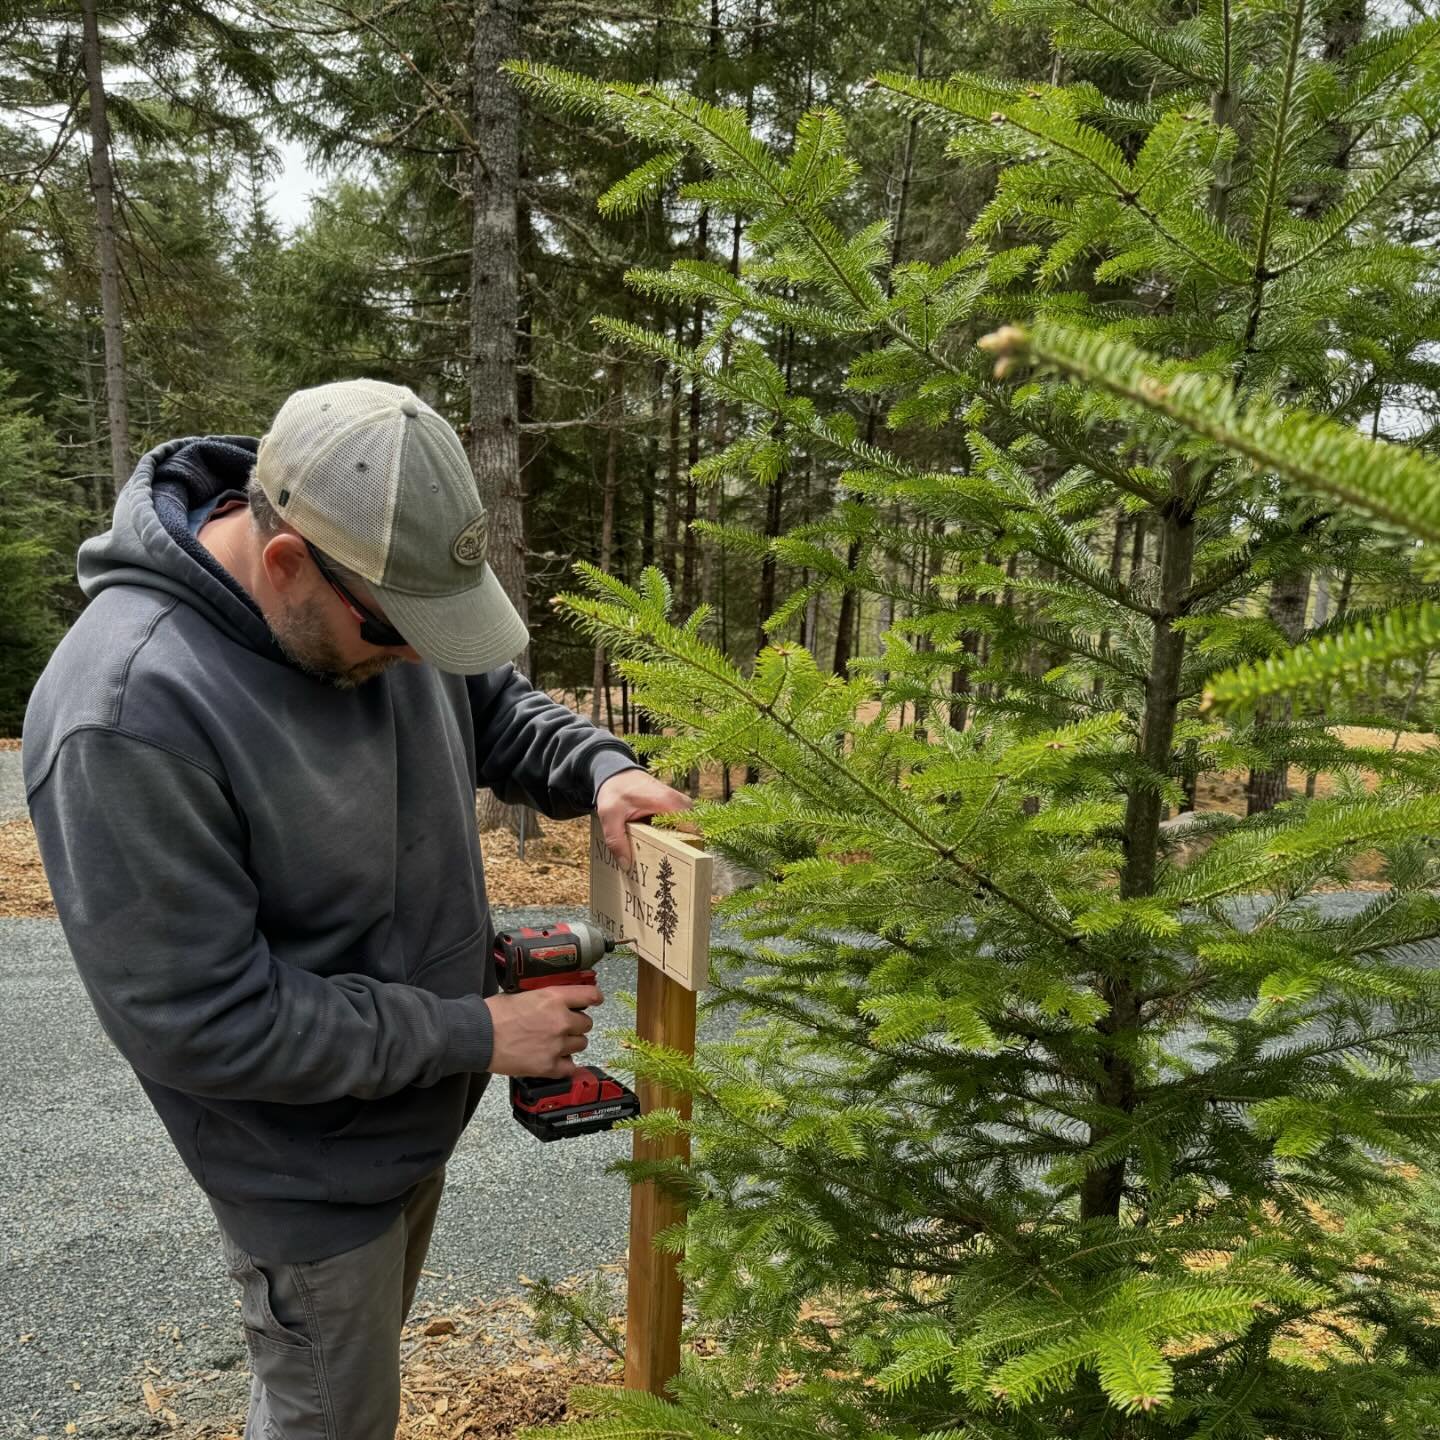 Josh has been working hard, doing all that he can, to help with getting ready to open this summer. So thankful for him! 

#familyownedandoperated #yurts #grandopening #comingsoon #barharbormaine